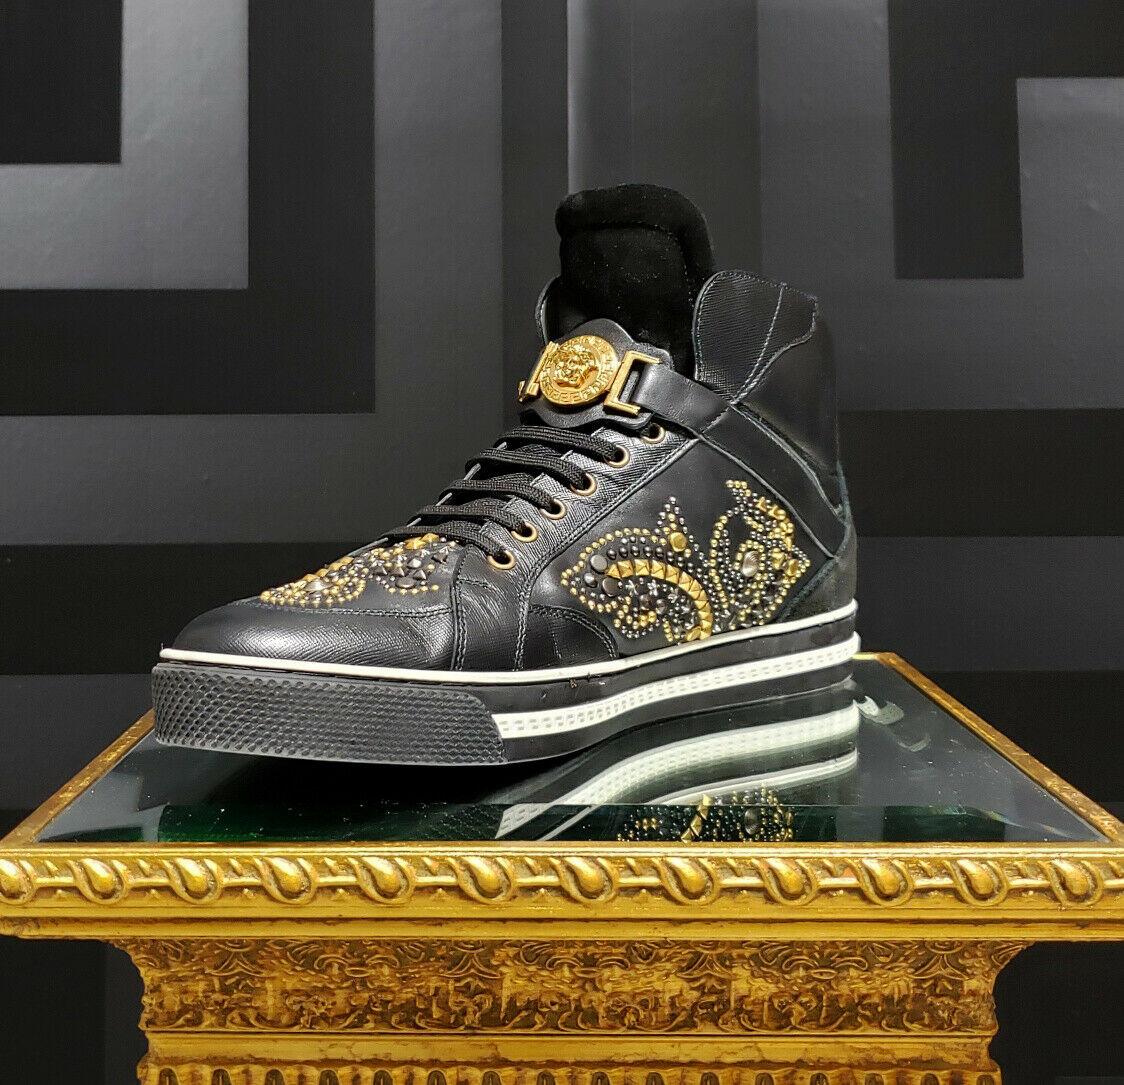 Black New VERSACE STUDDED HIGH-TOP SNEAKERS with GOLD MEDUSA BUCKLE 